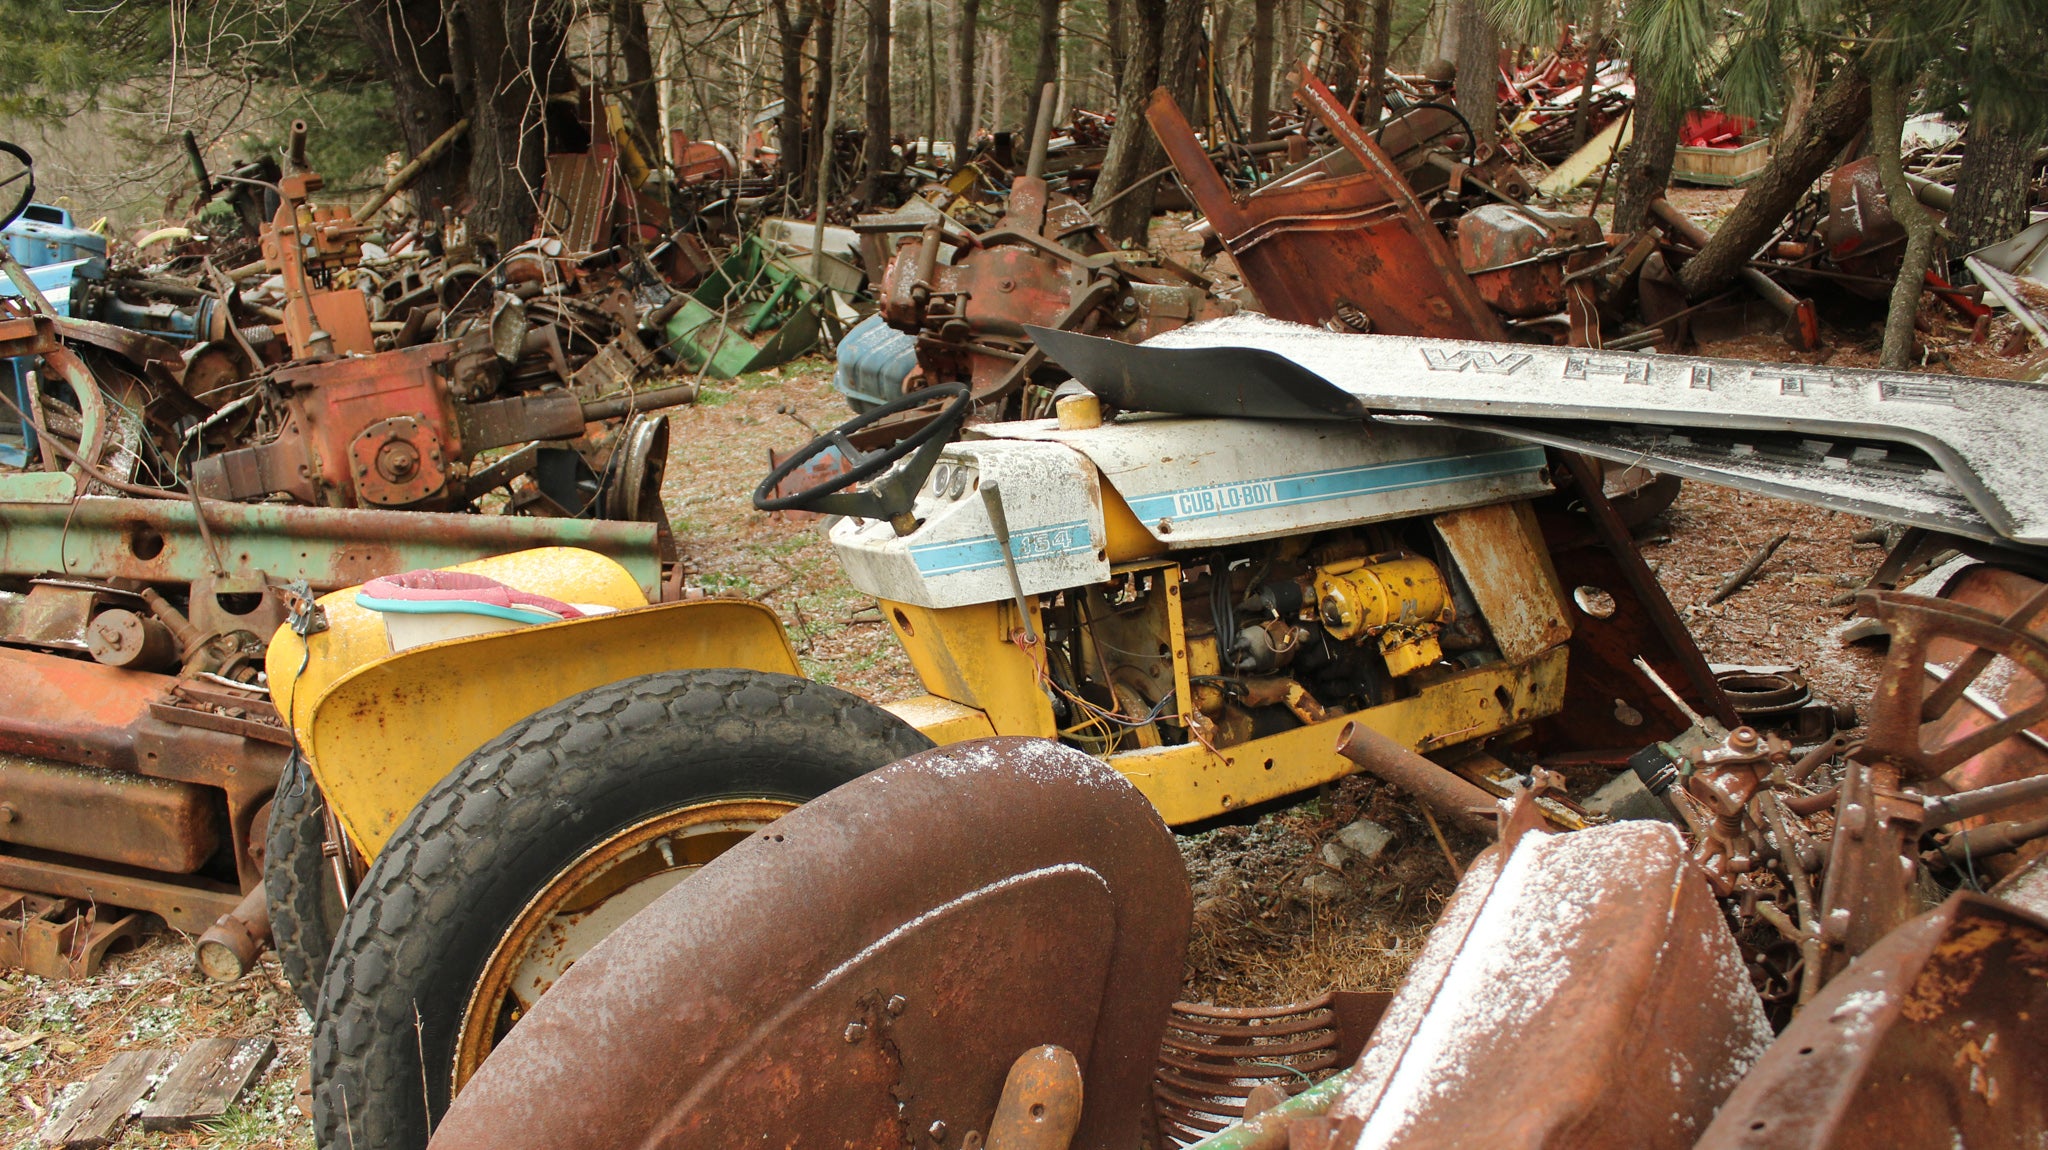 This Vast Farm Salvage Yard In The